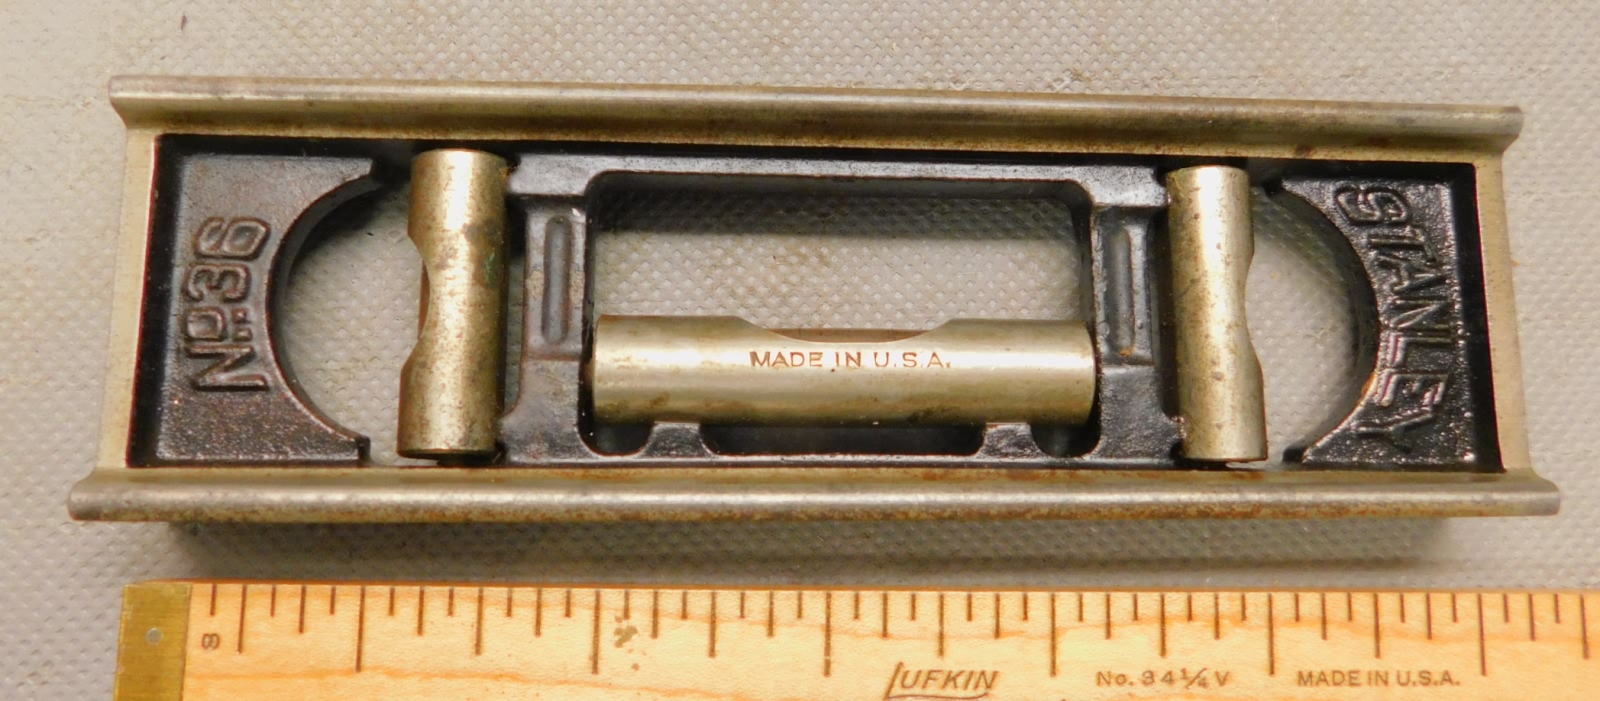 Stanley No. 36G cast iron level with brass vial covers - Ruby Lane